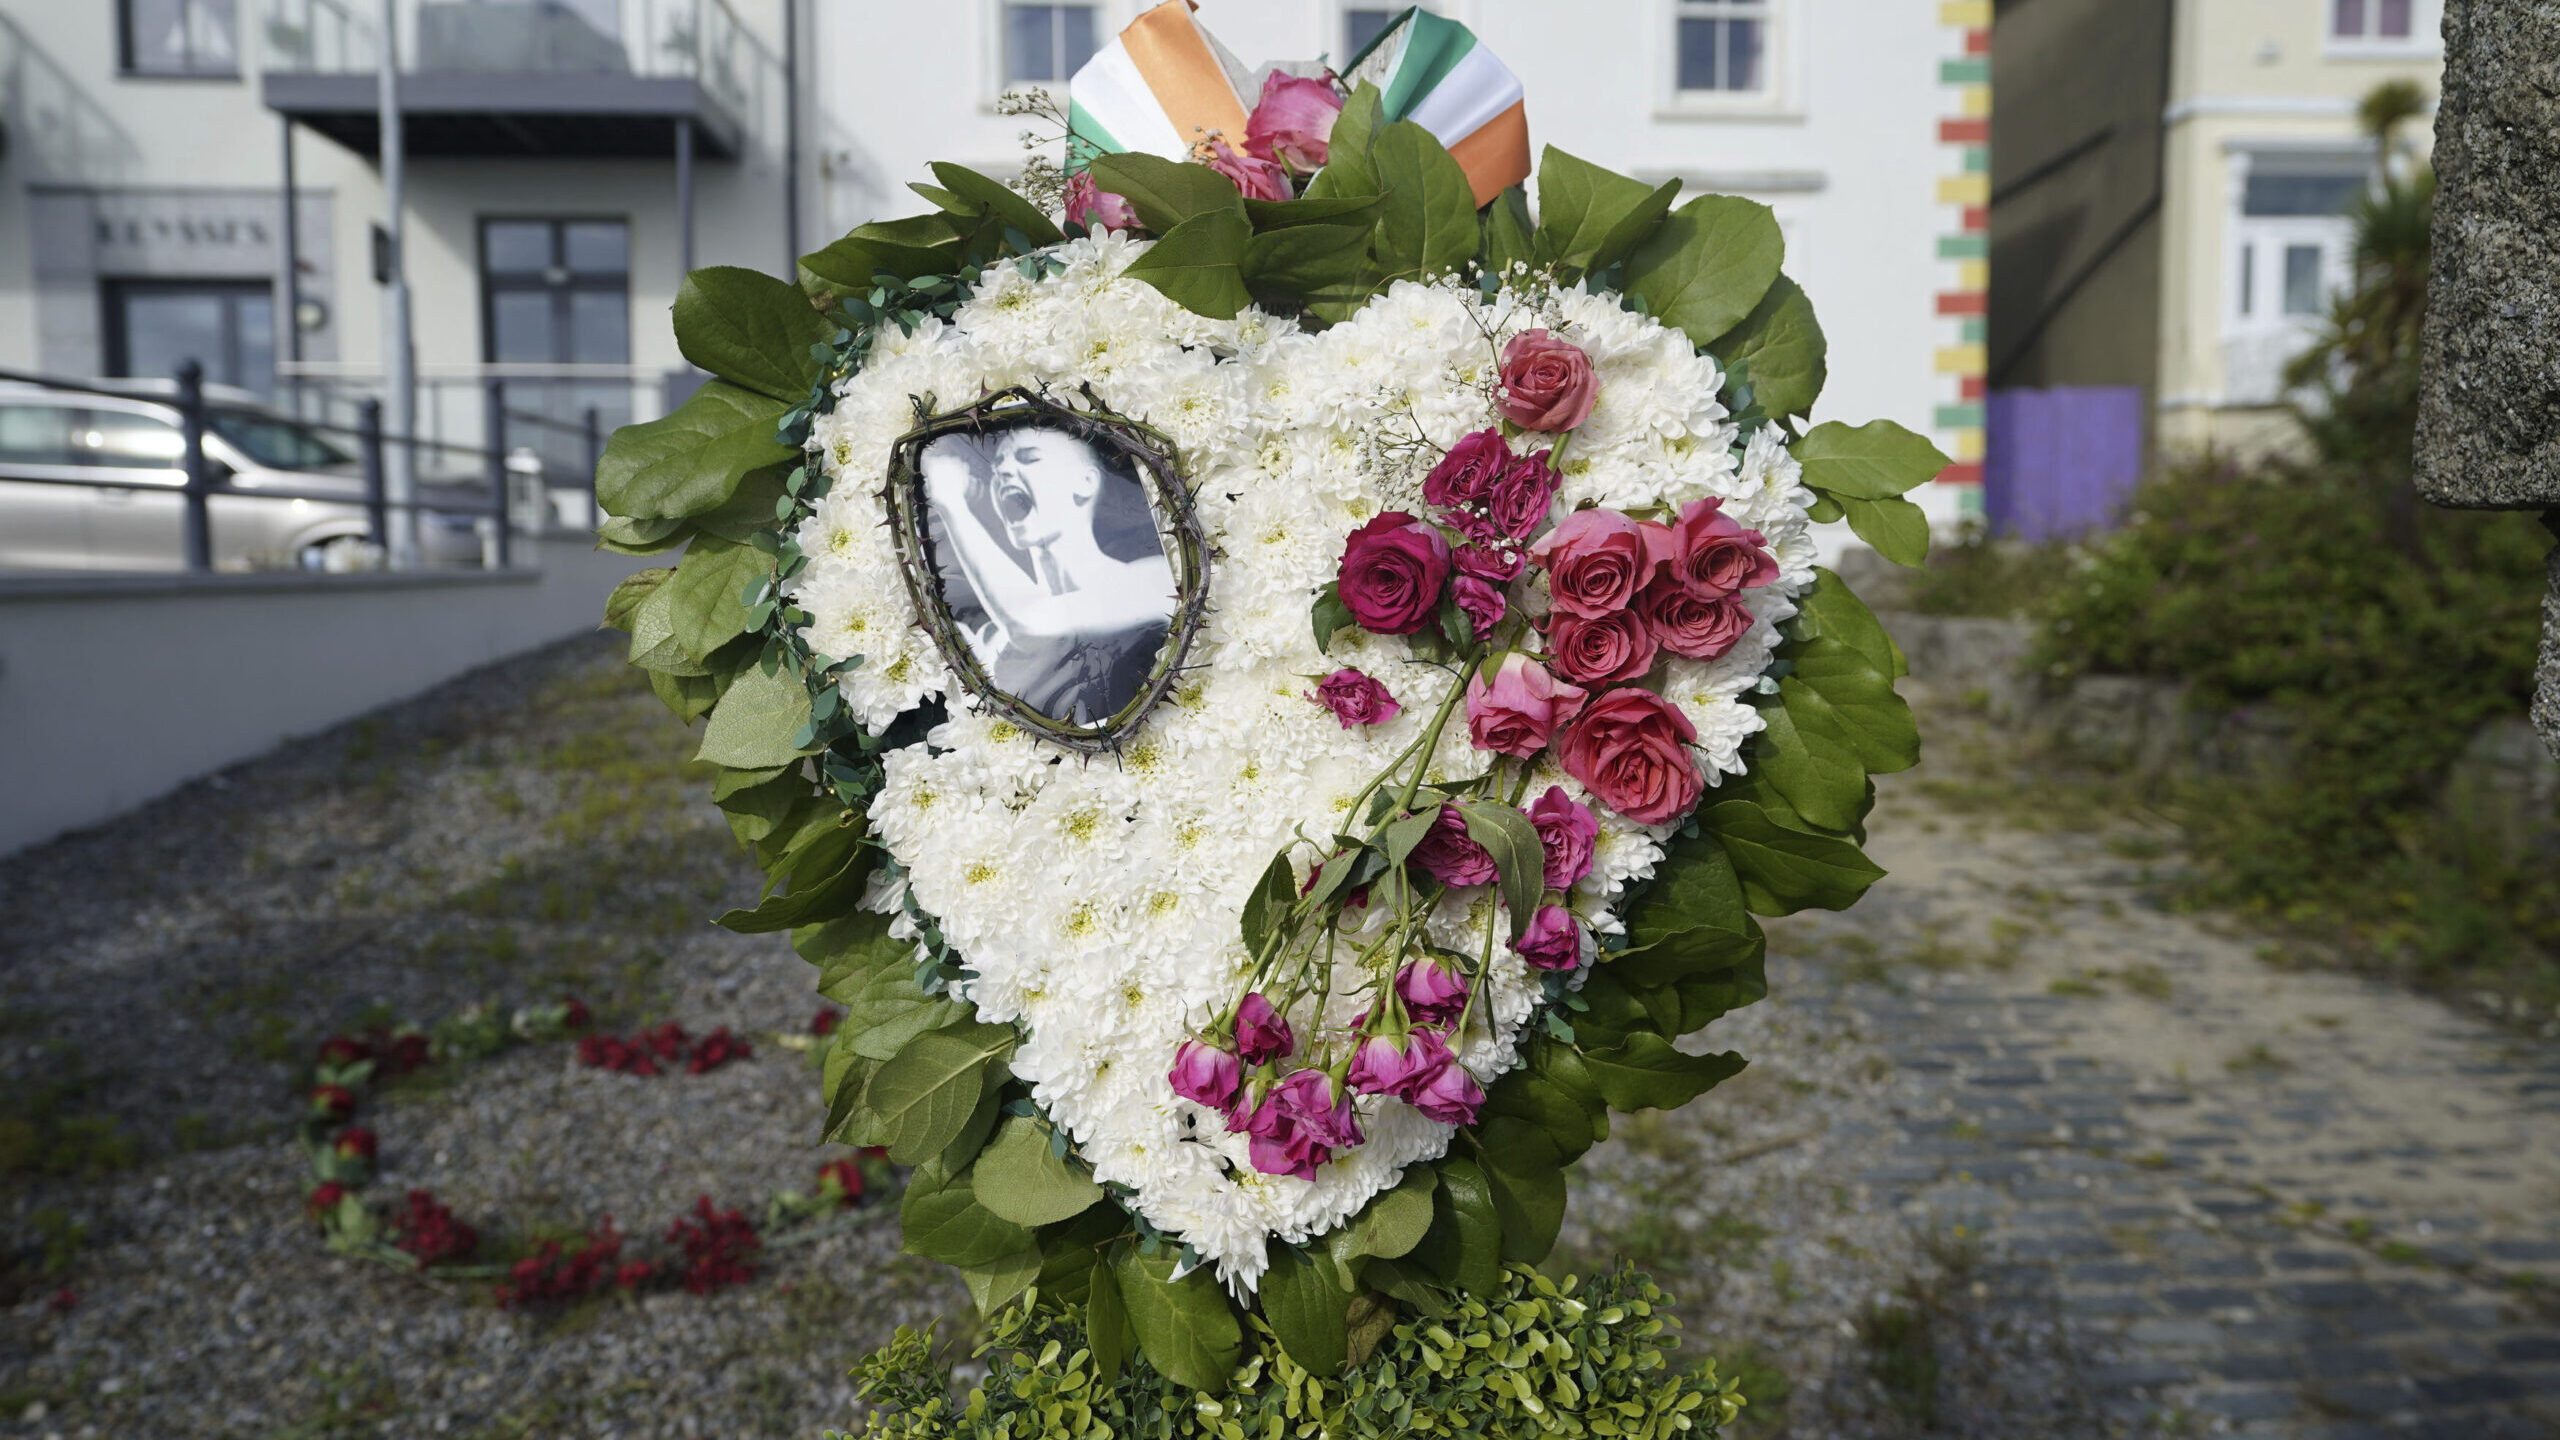 Floral tributes left outside the former home of Sinead O'Connor ahead of the late singer's funeral,...